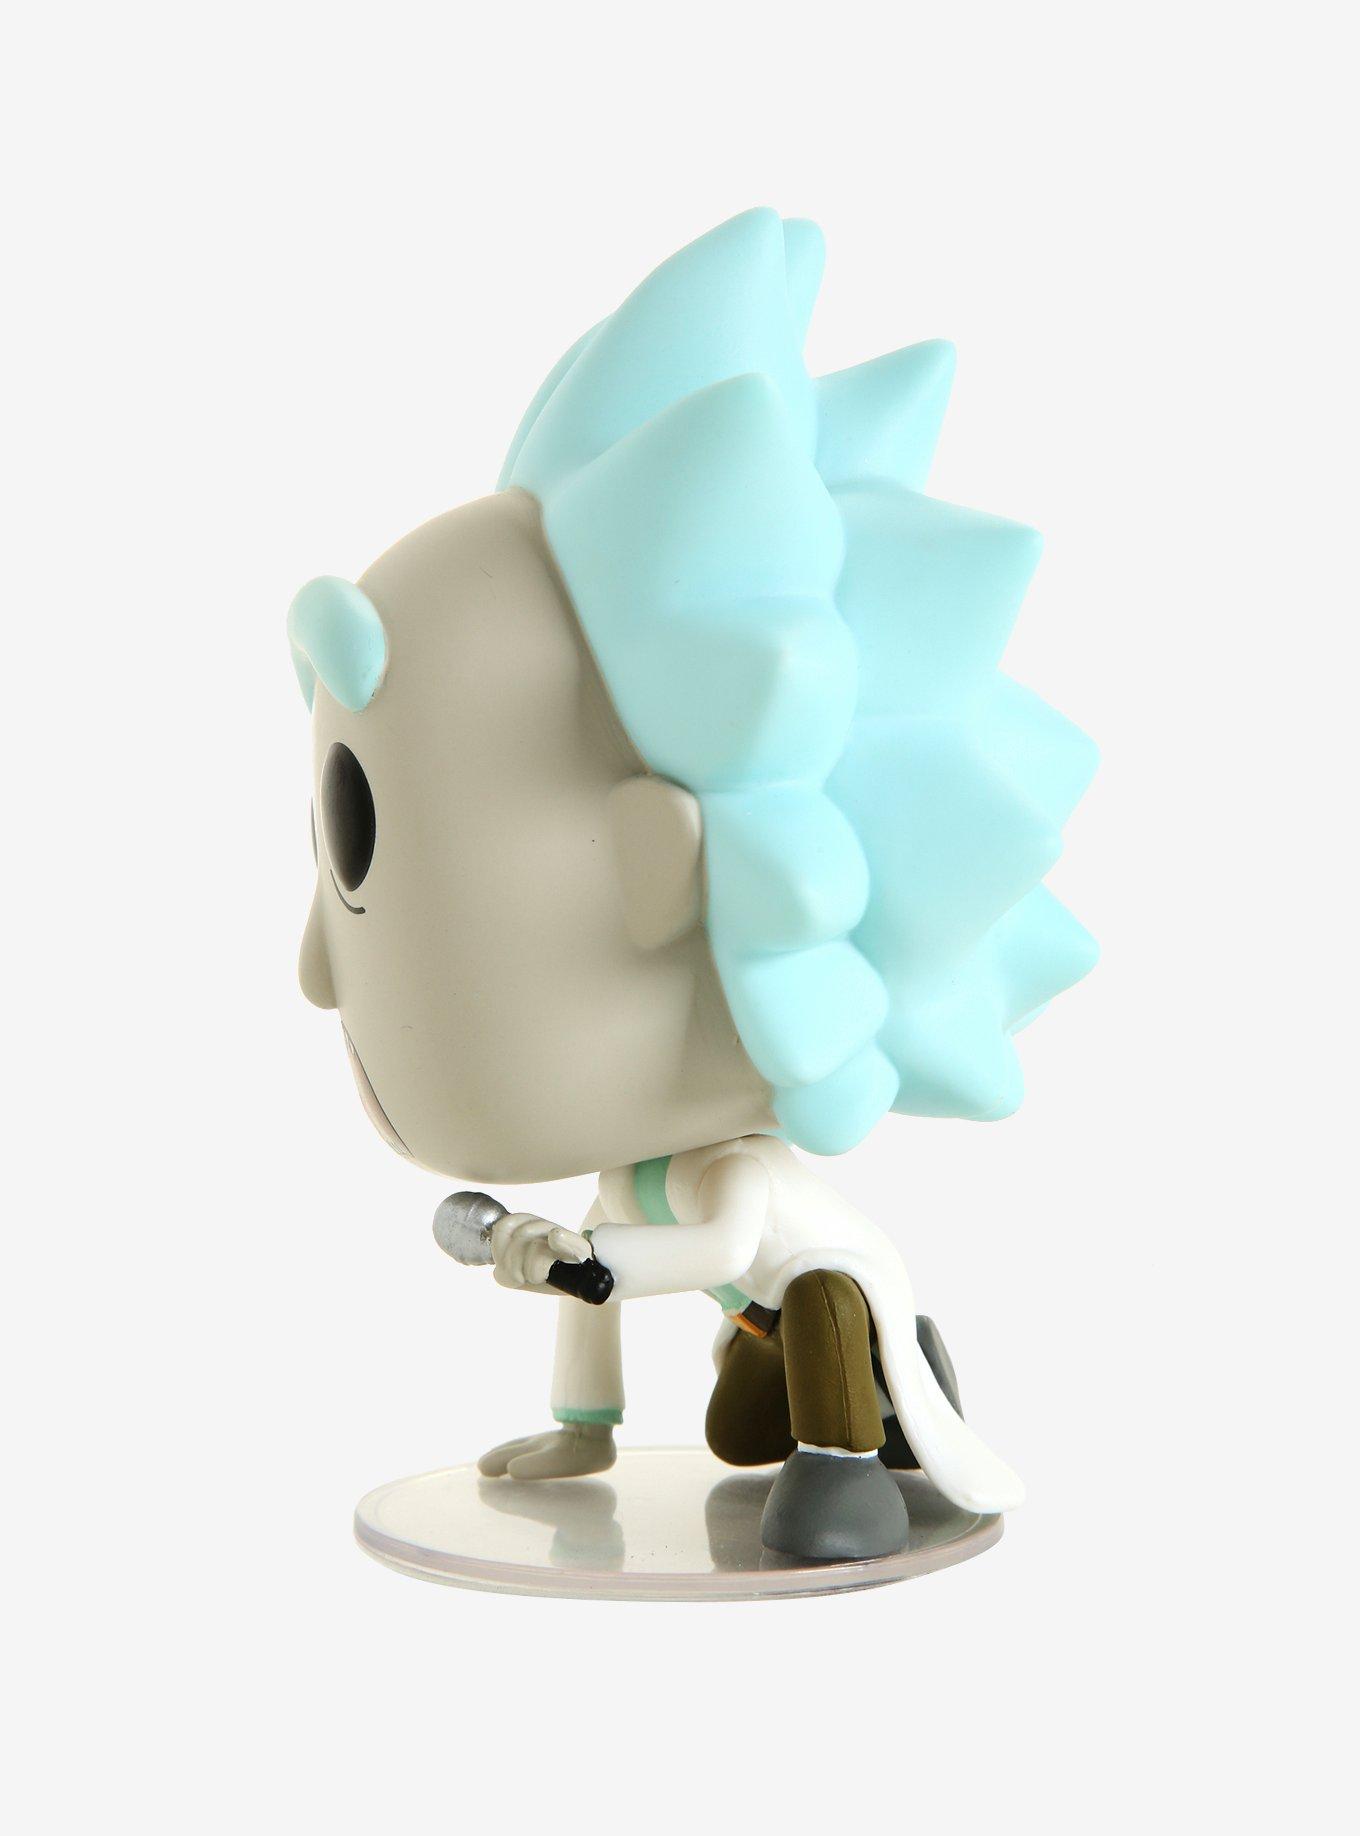 Funko Rick And Morty Pop! Animation Schwifty Rick Vinyl Figure Hot Topic Exclusive, , alternate